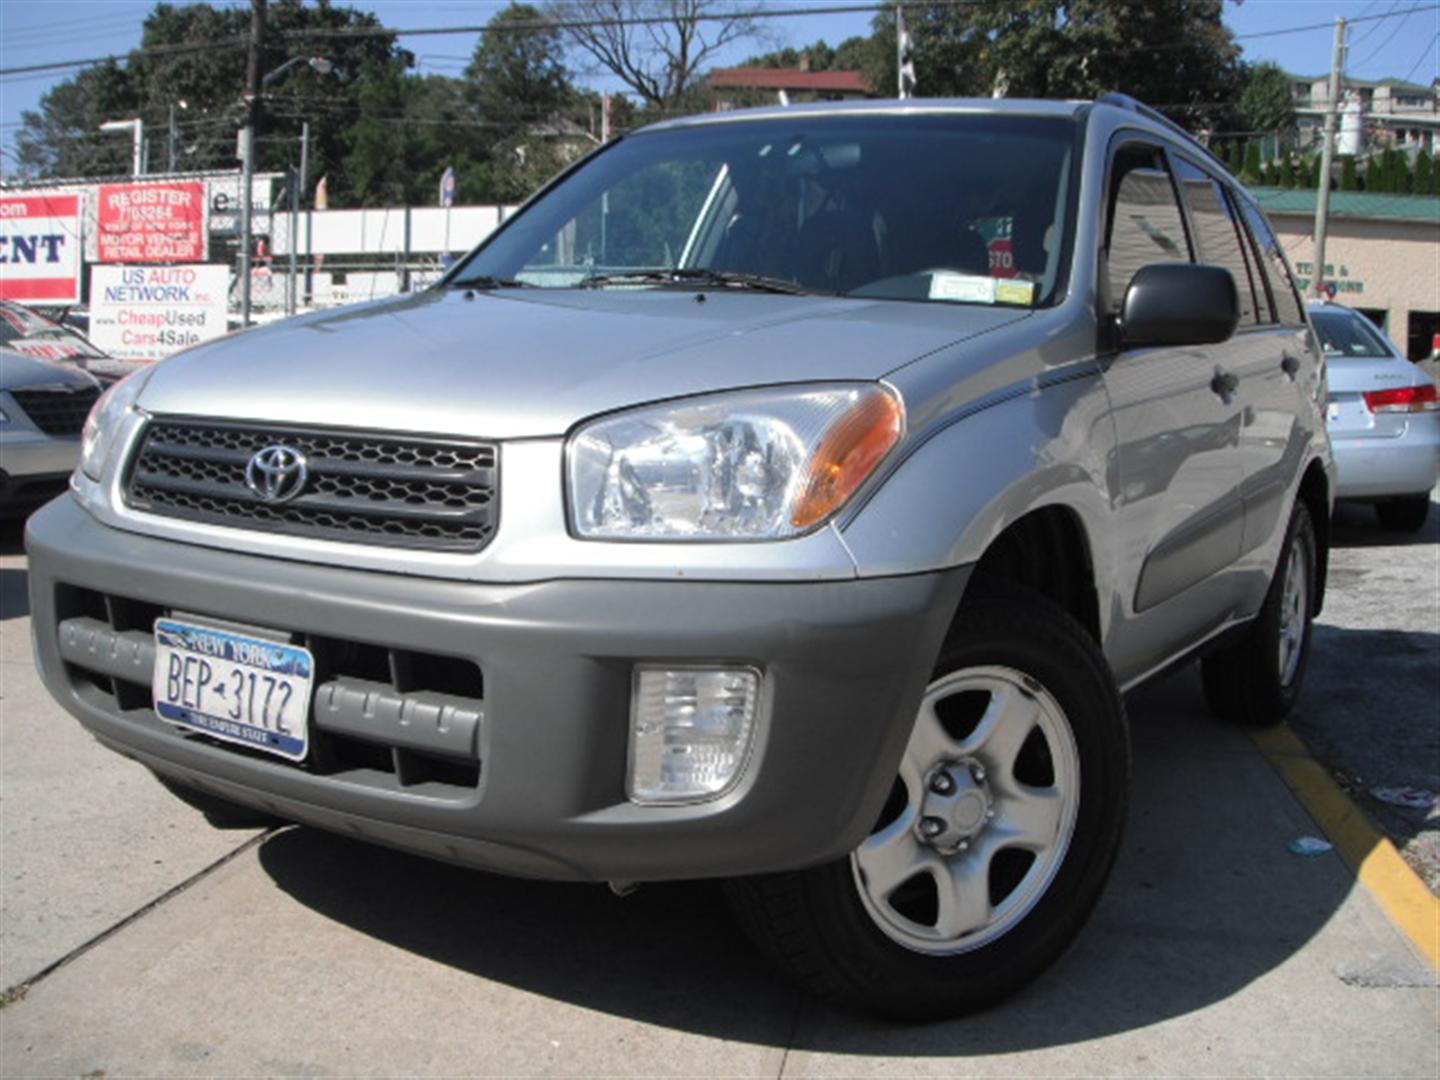 Offers Used Car For Sale 2001 Toyota Rav4 4wd